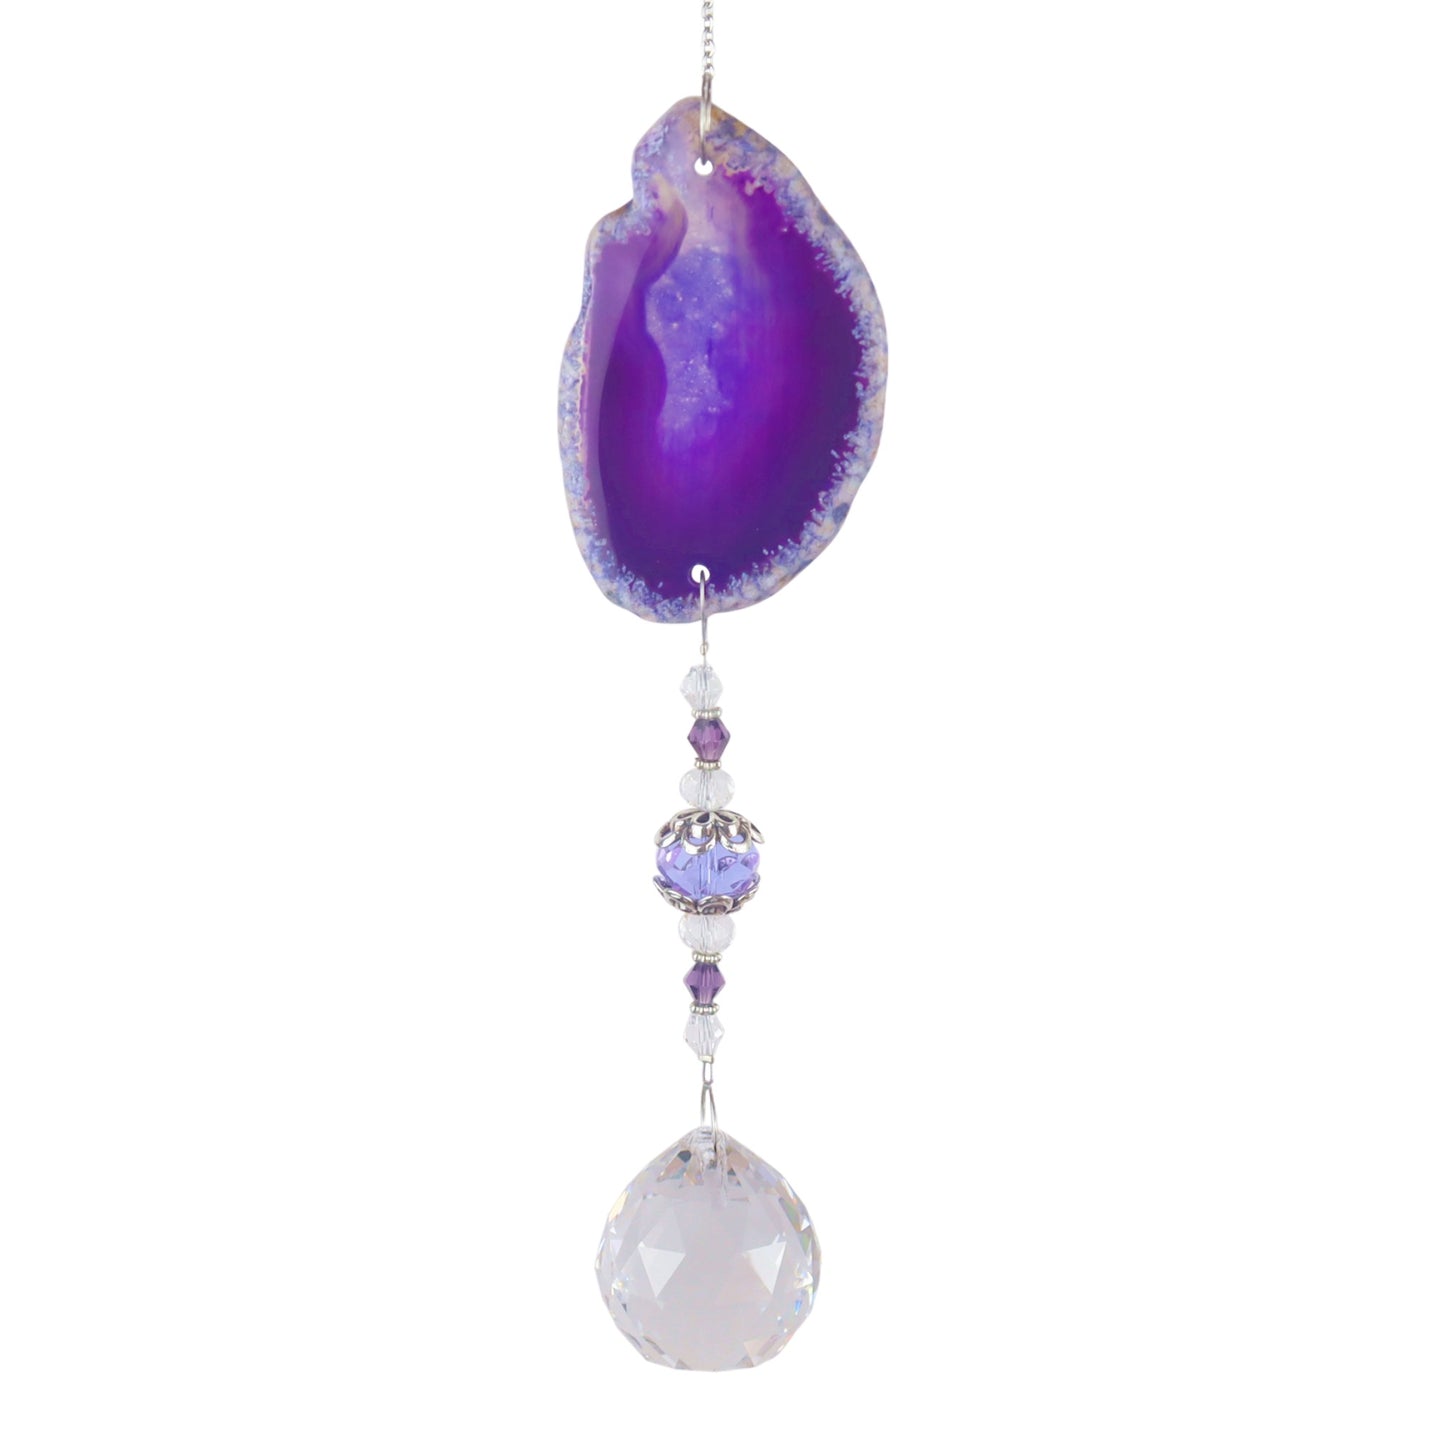 K9 Purple Agate Slice Crystal Hanger - 15.5 inches long - NEW523